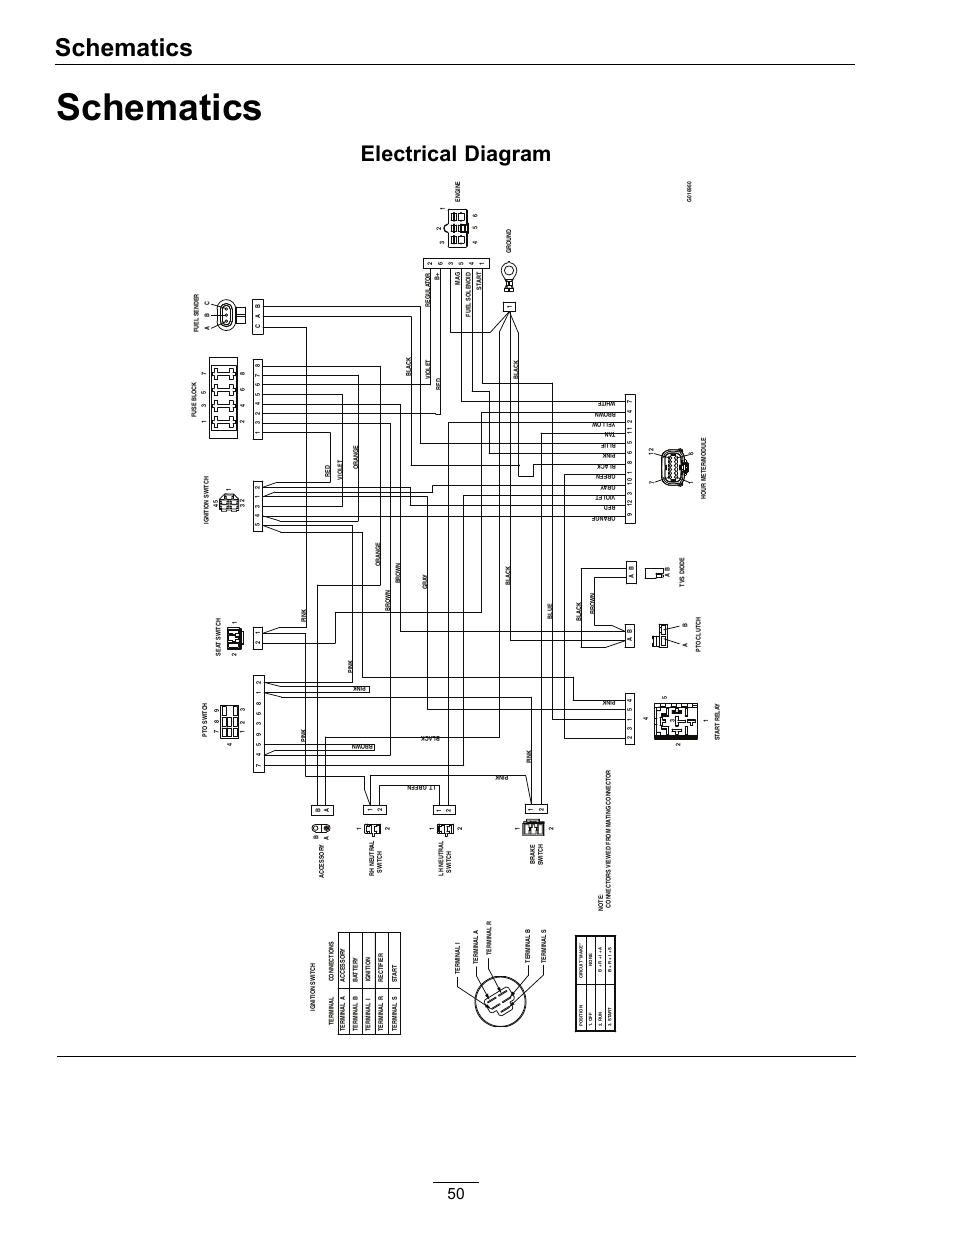 Ford Ignition Wiring Diagram from diagramweb.net